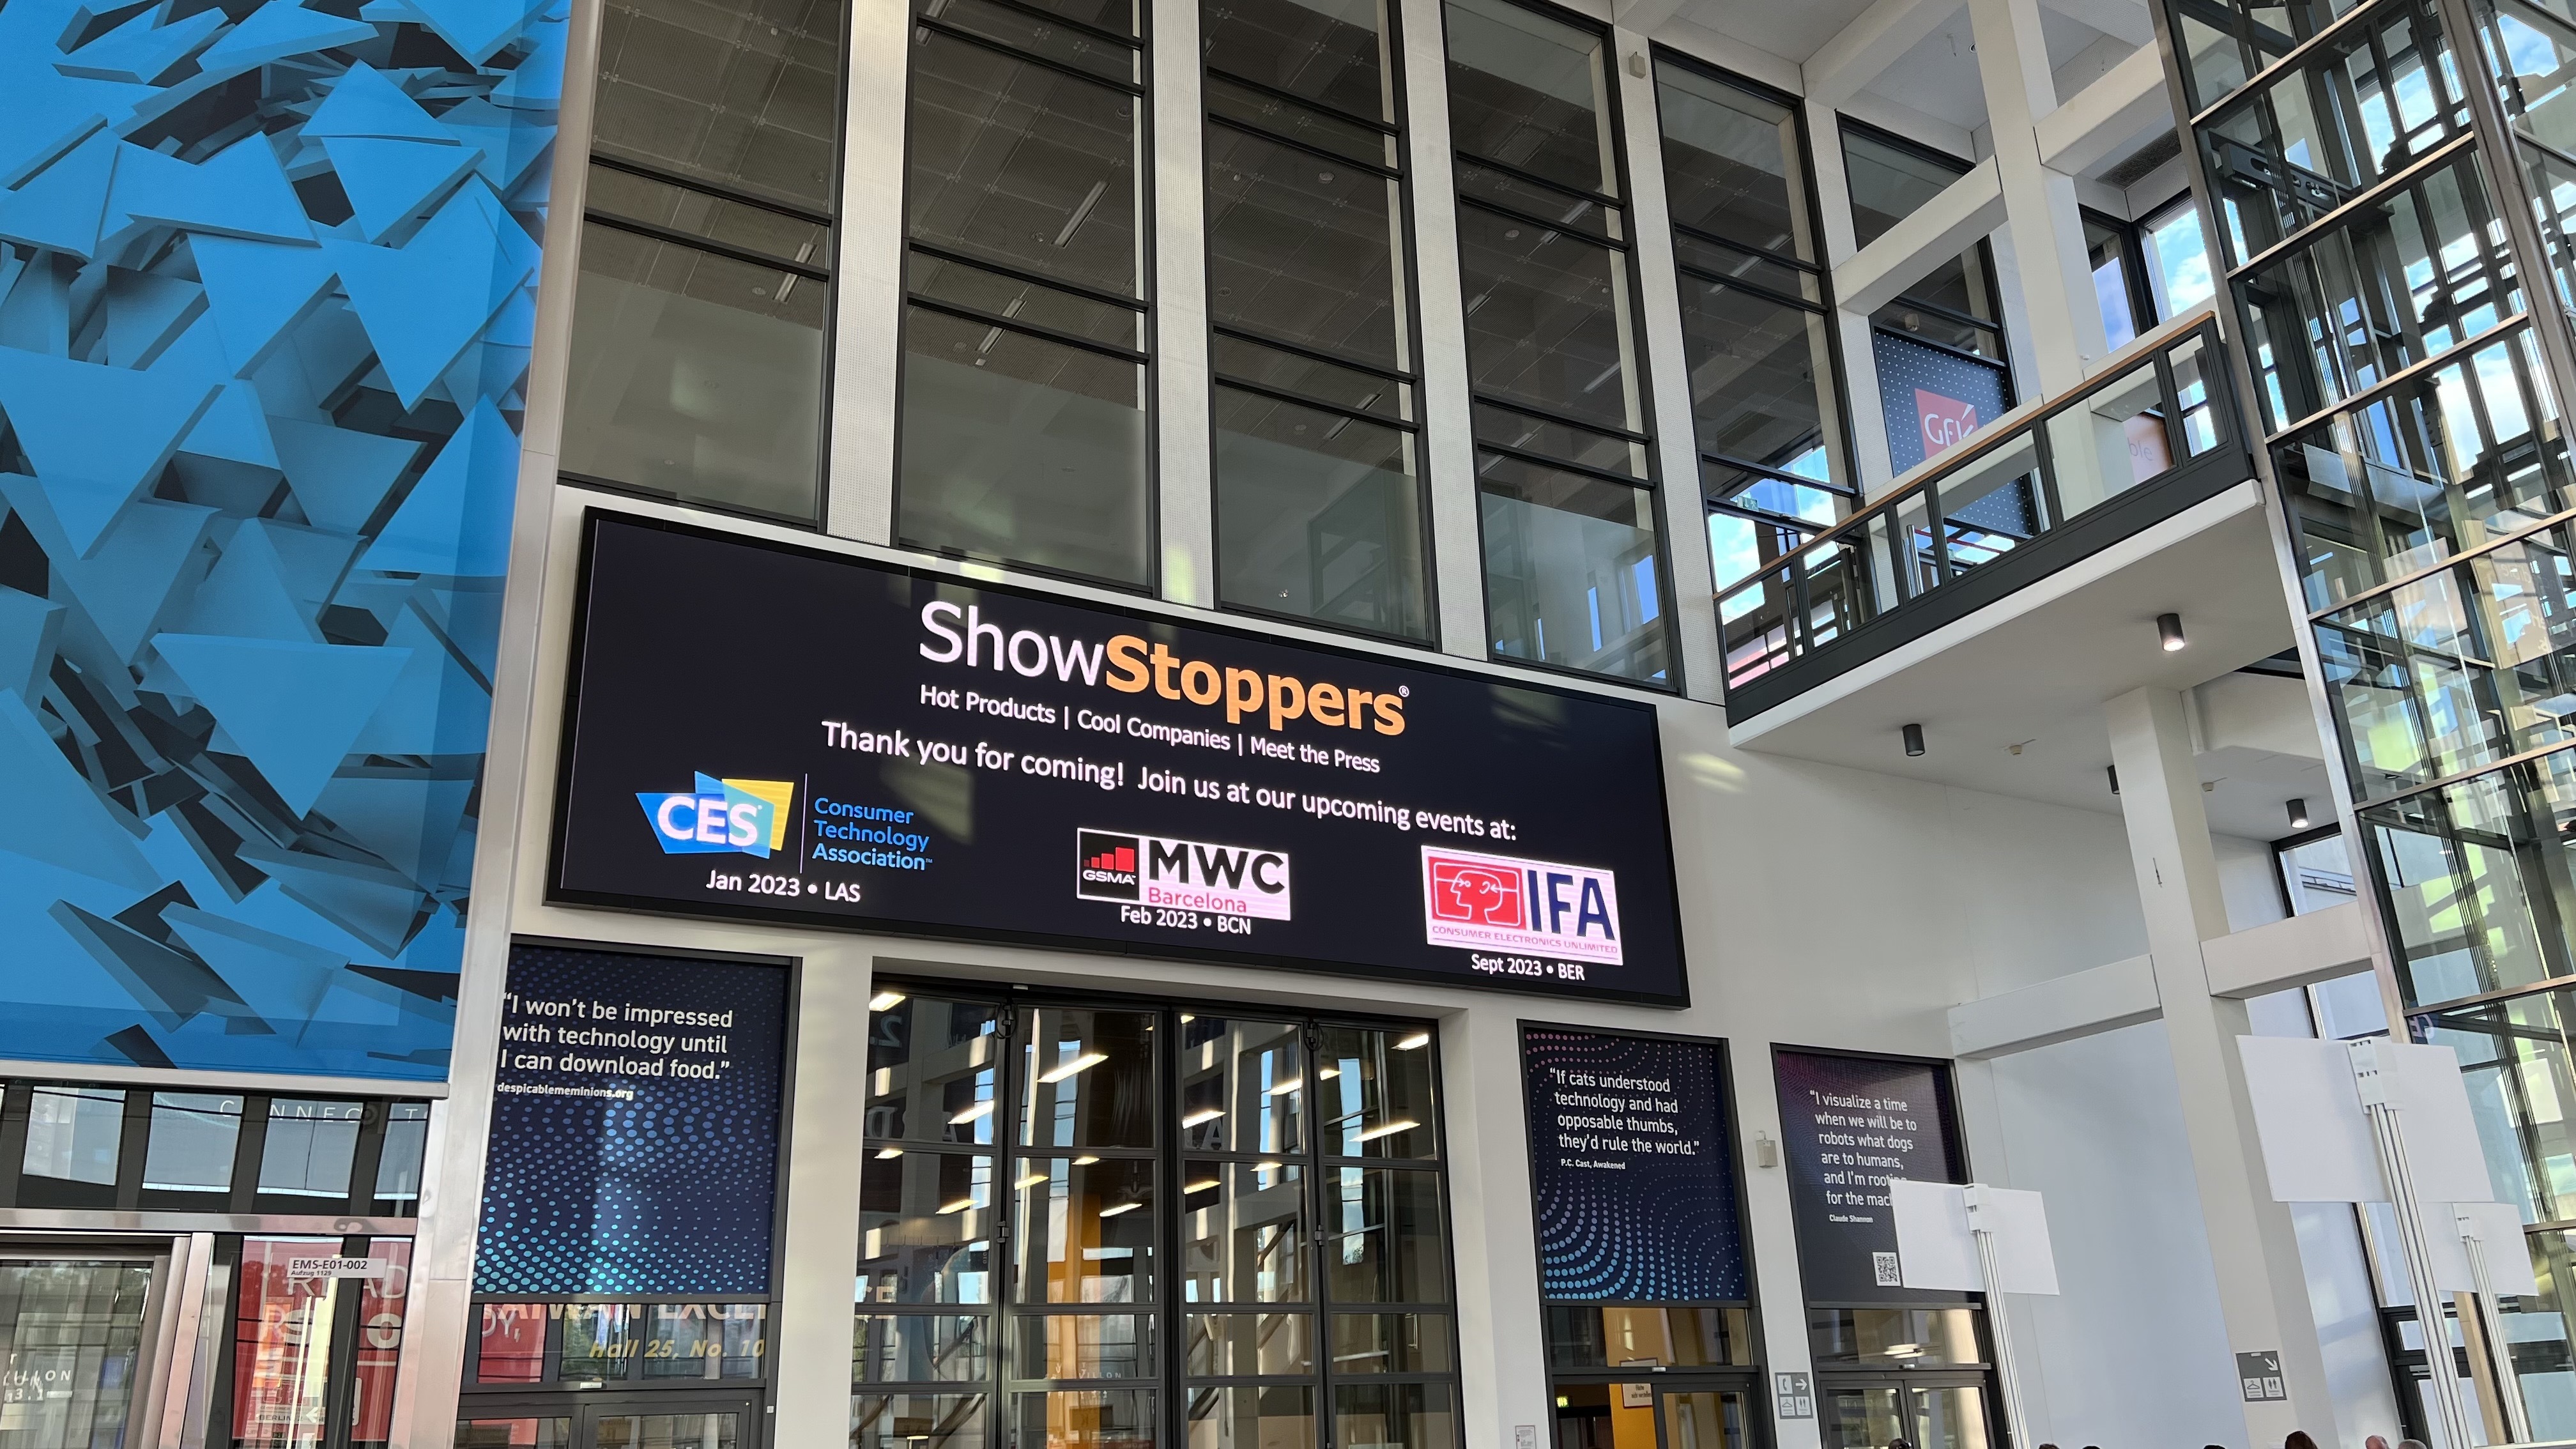 an photos of the Showstoppers sign at IFA 20222